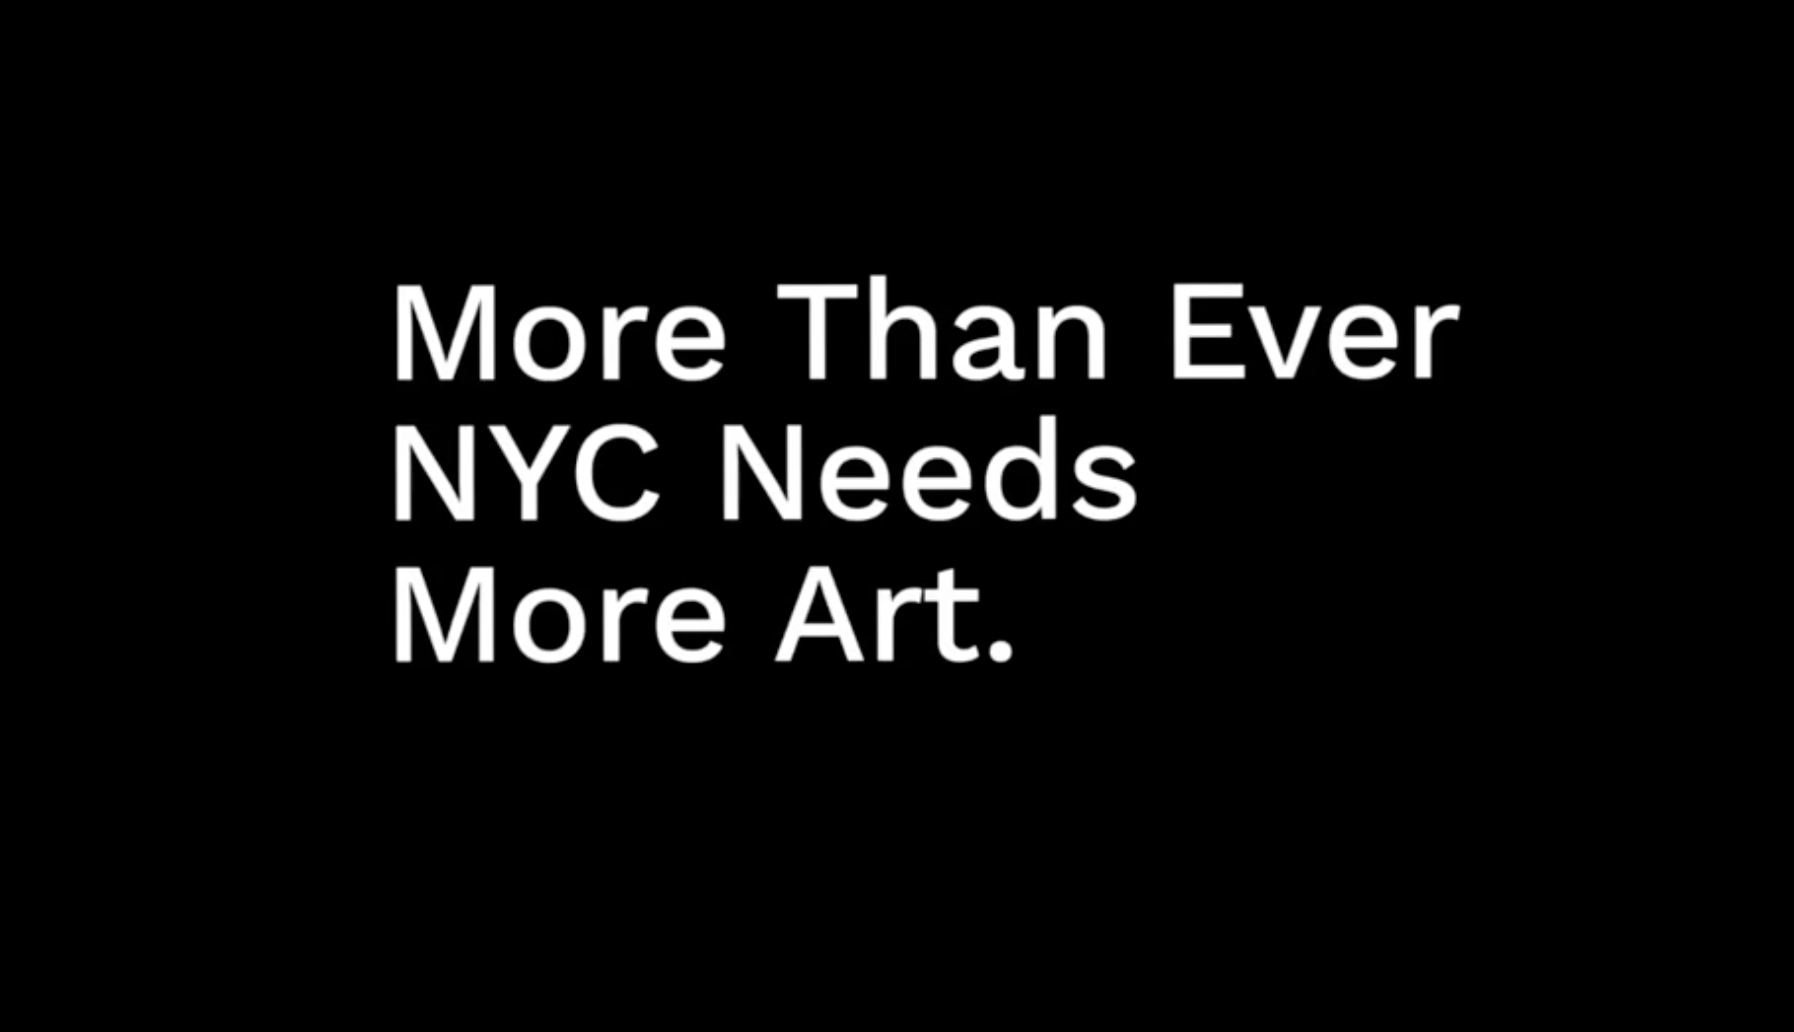 A black box with white text that reads "More than ever NYC needs More Art.